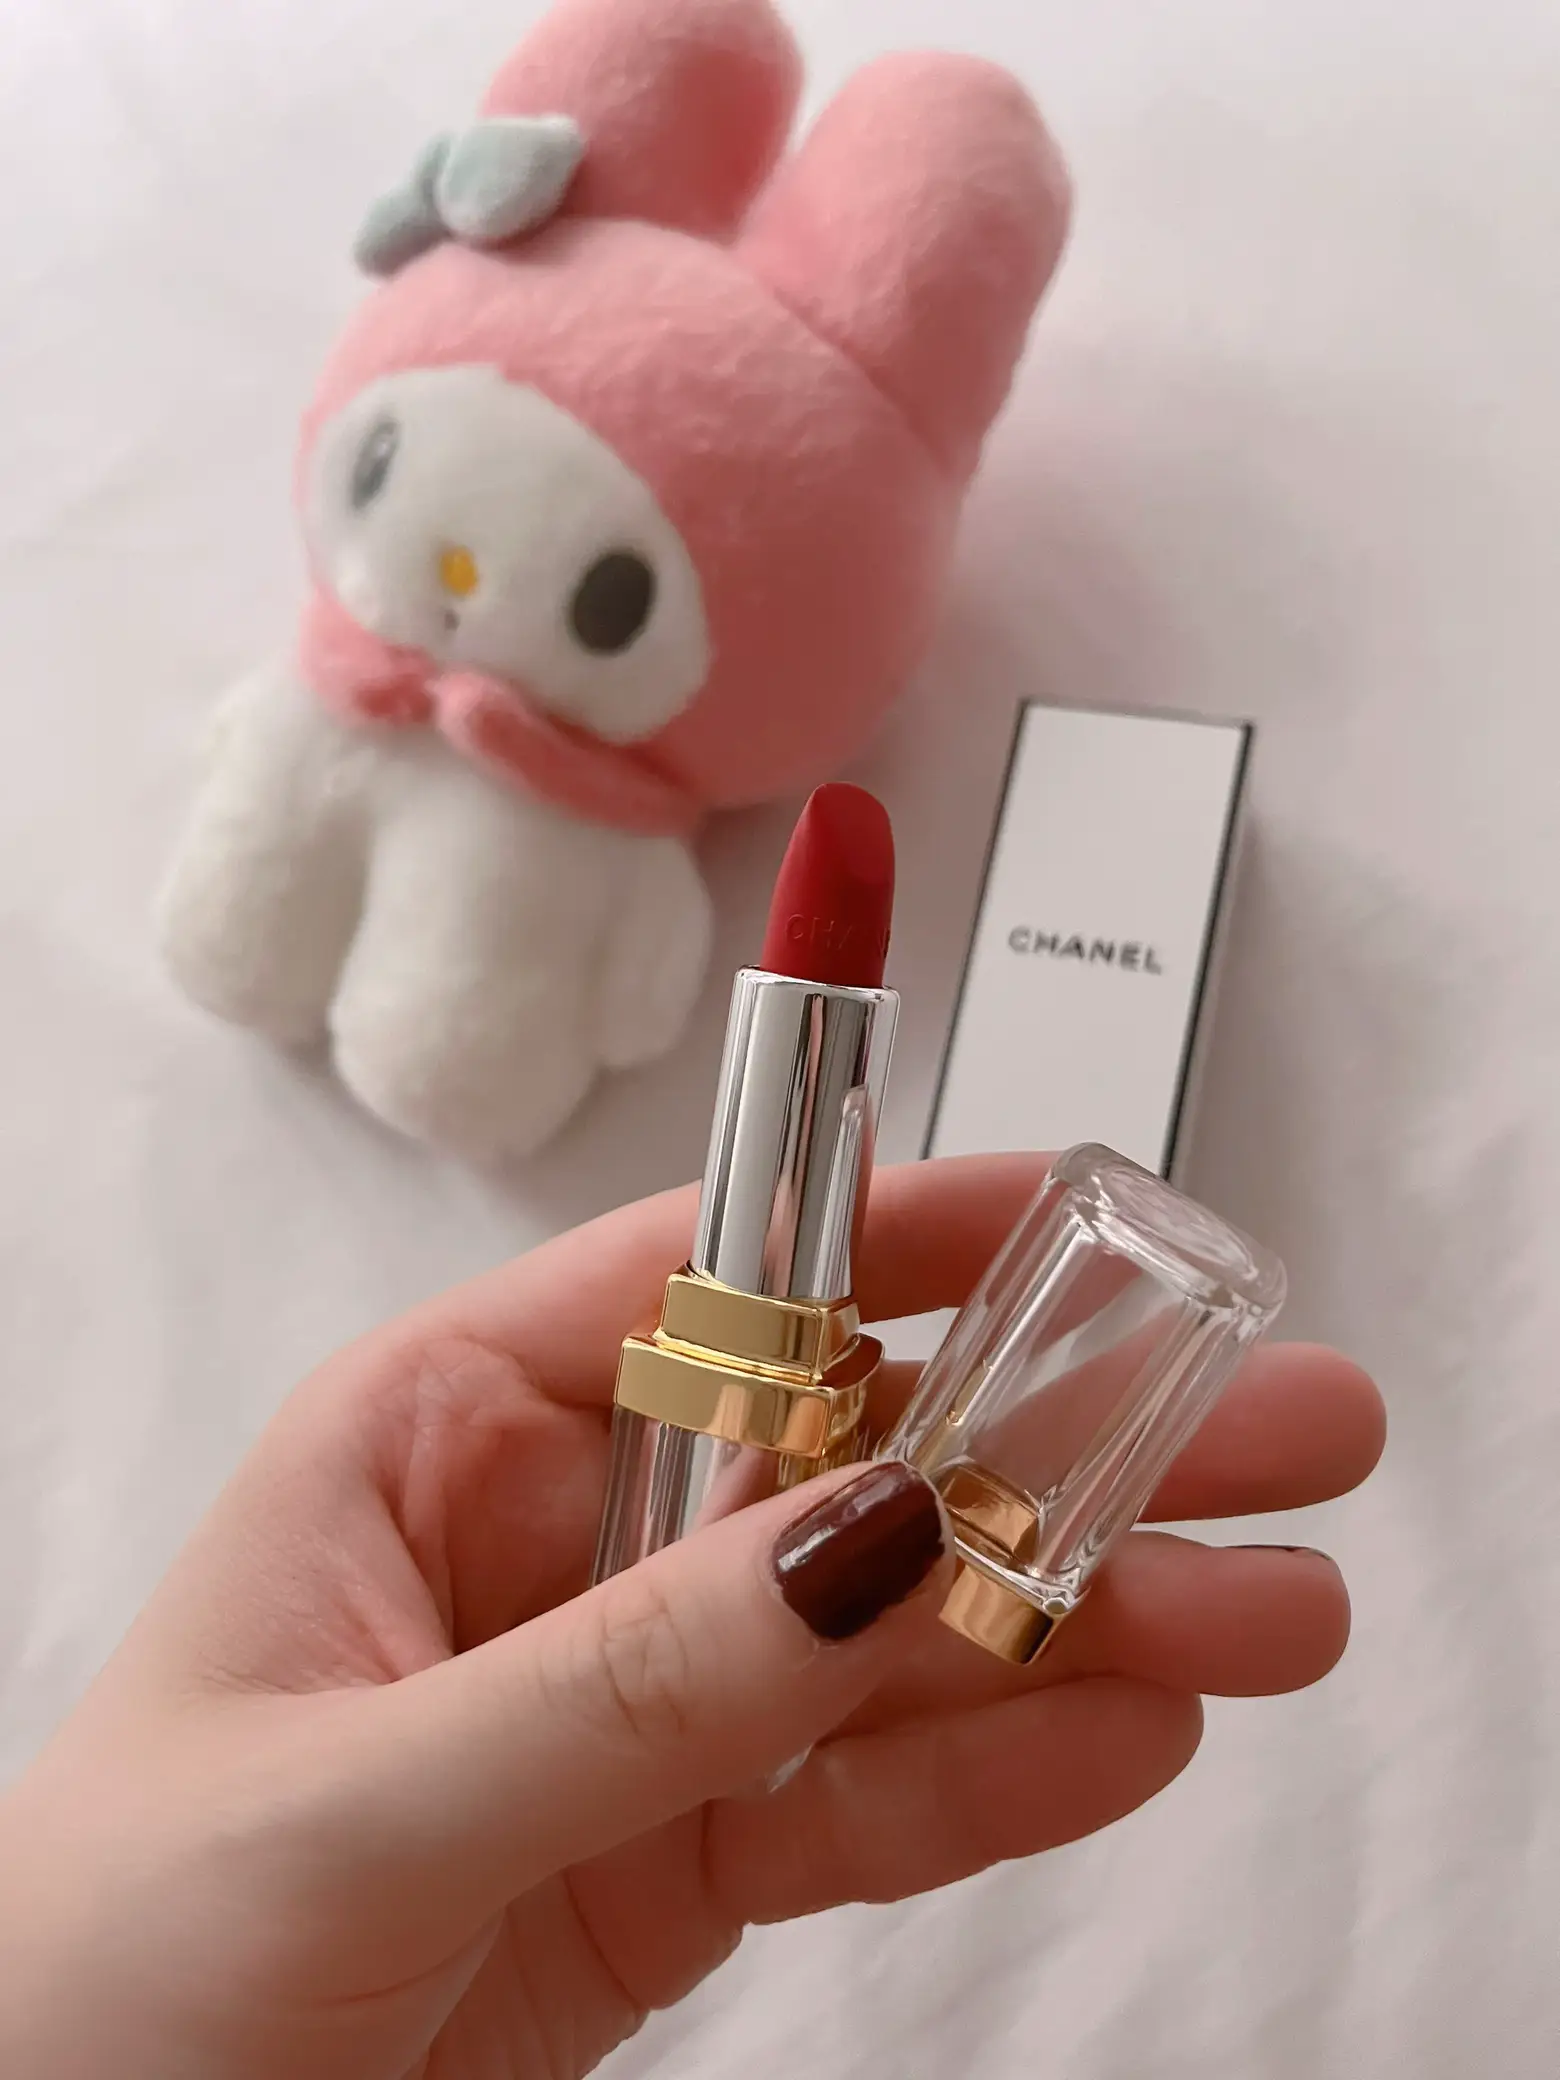 Chanel's new exclusive lipstick: 31 le rouge 💕, Gallery posted by Jackie  ♡